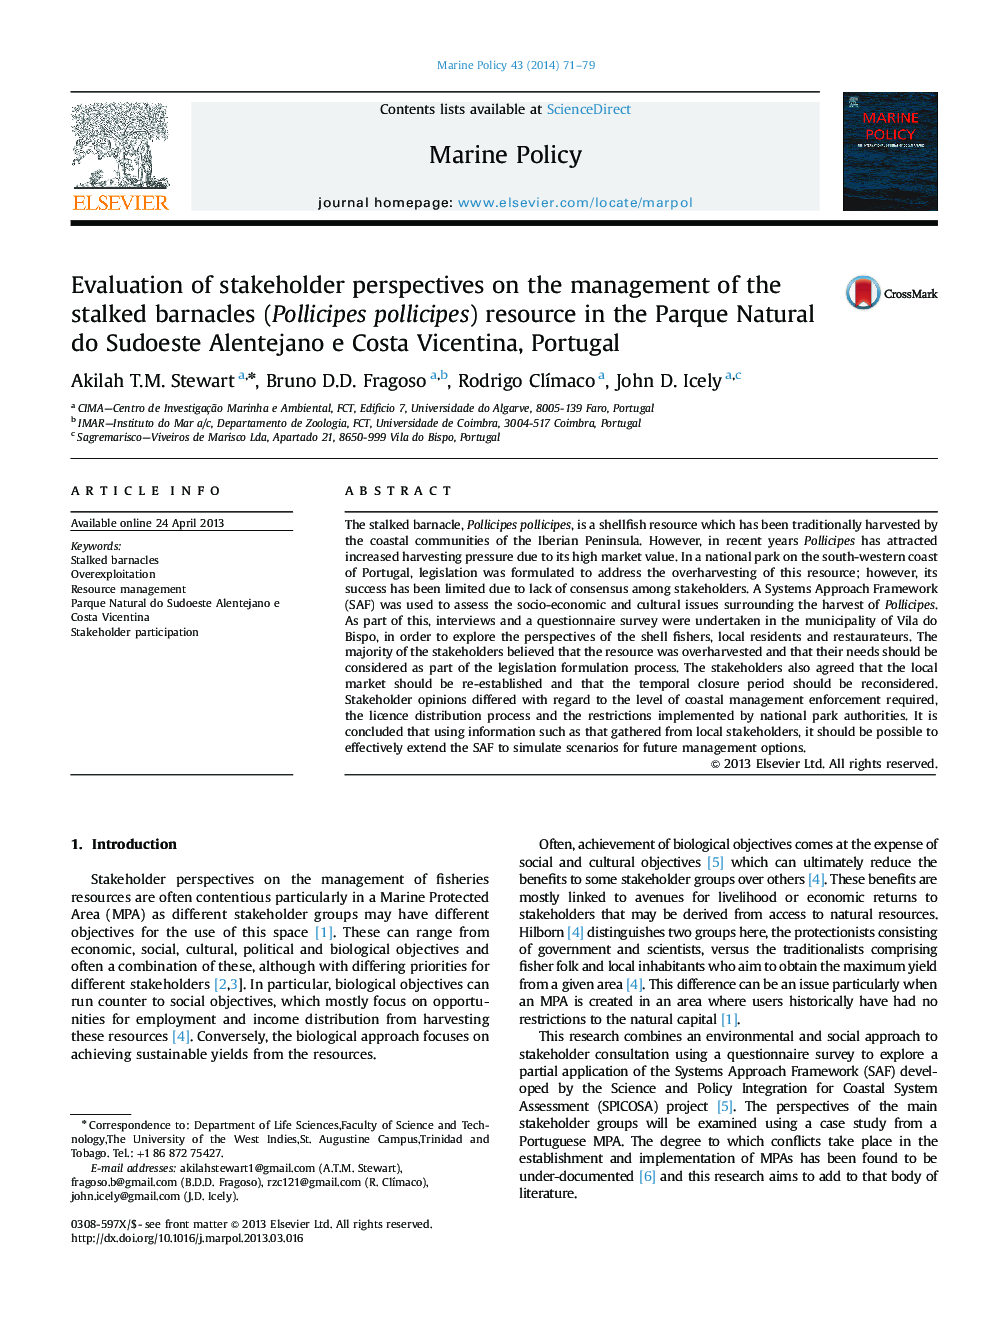 Evaluation of stakeholder perspectives on the management of the stalked barnacles (Pollicipes pollicipes) resource in the Parque Natural do Sudoeste Alentejano e Costa Vicentina, Portugal